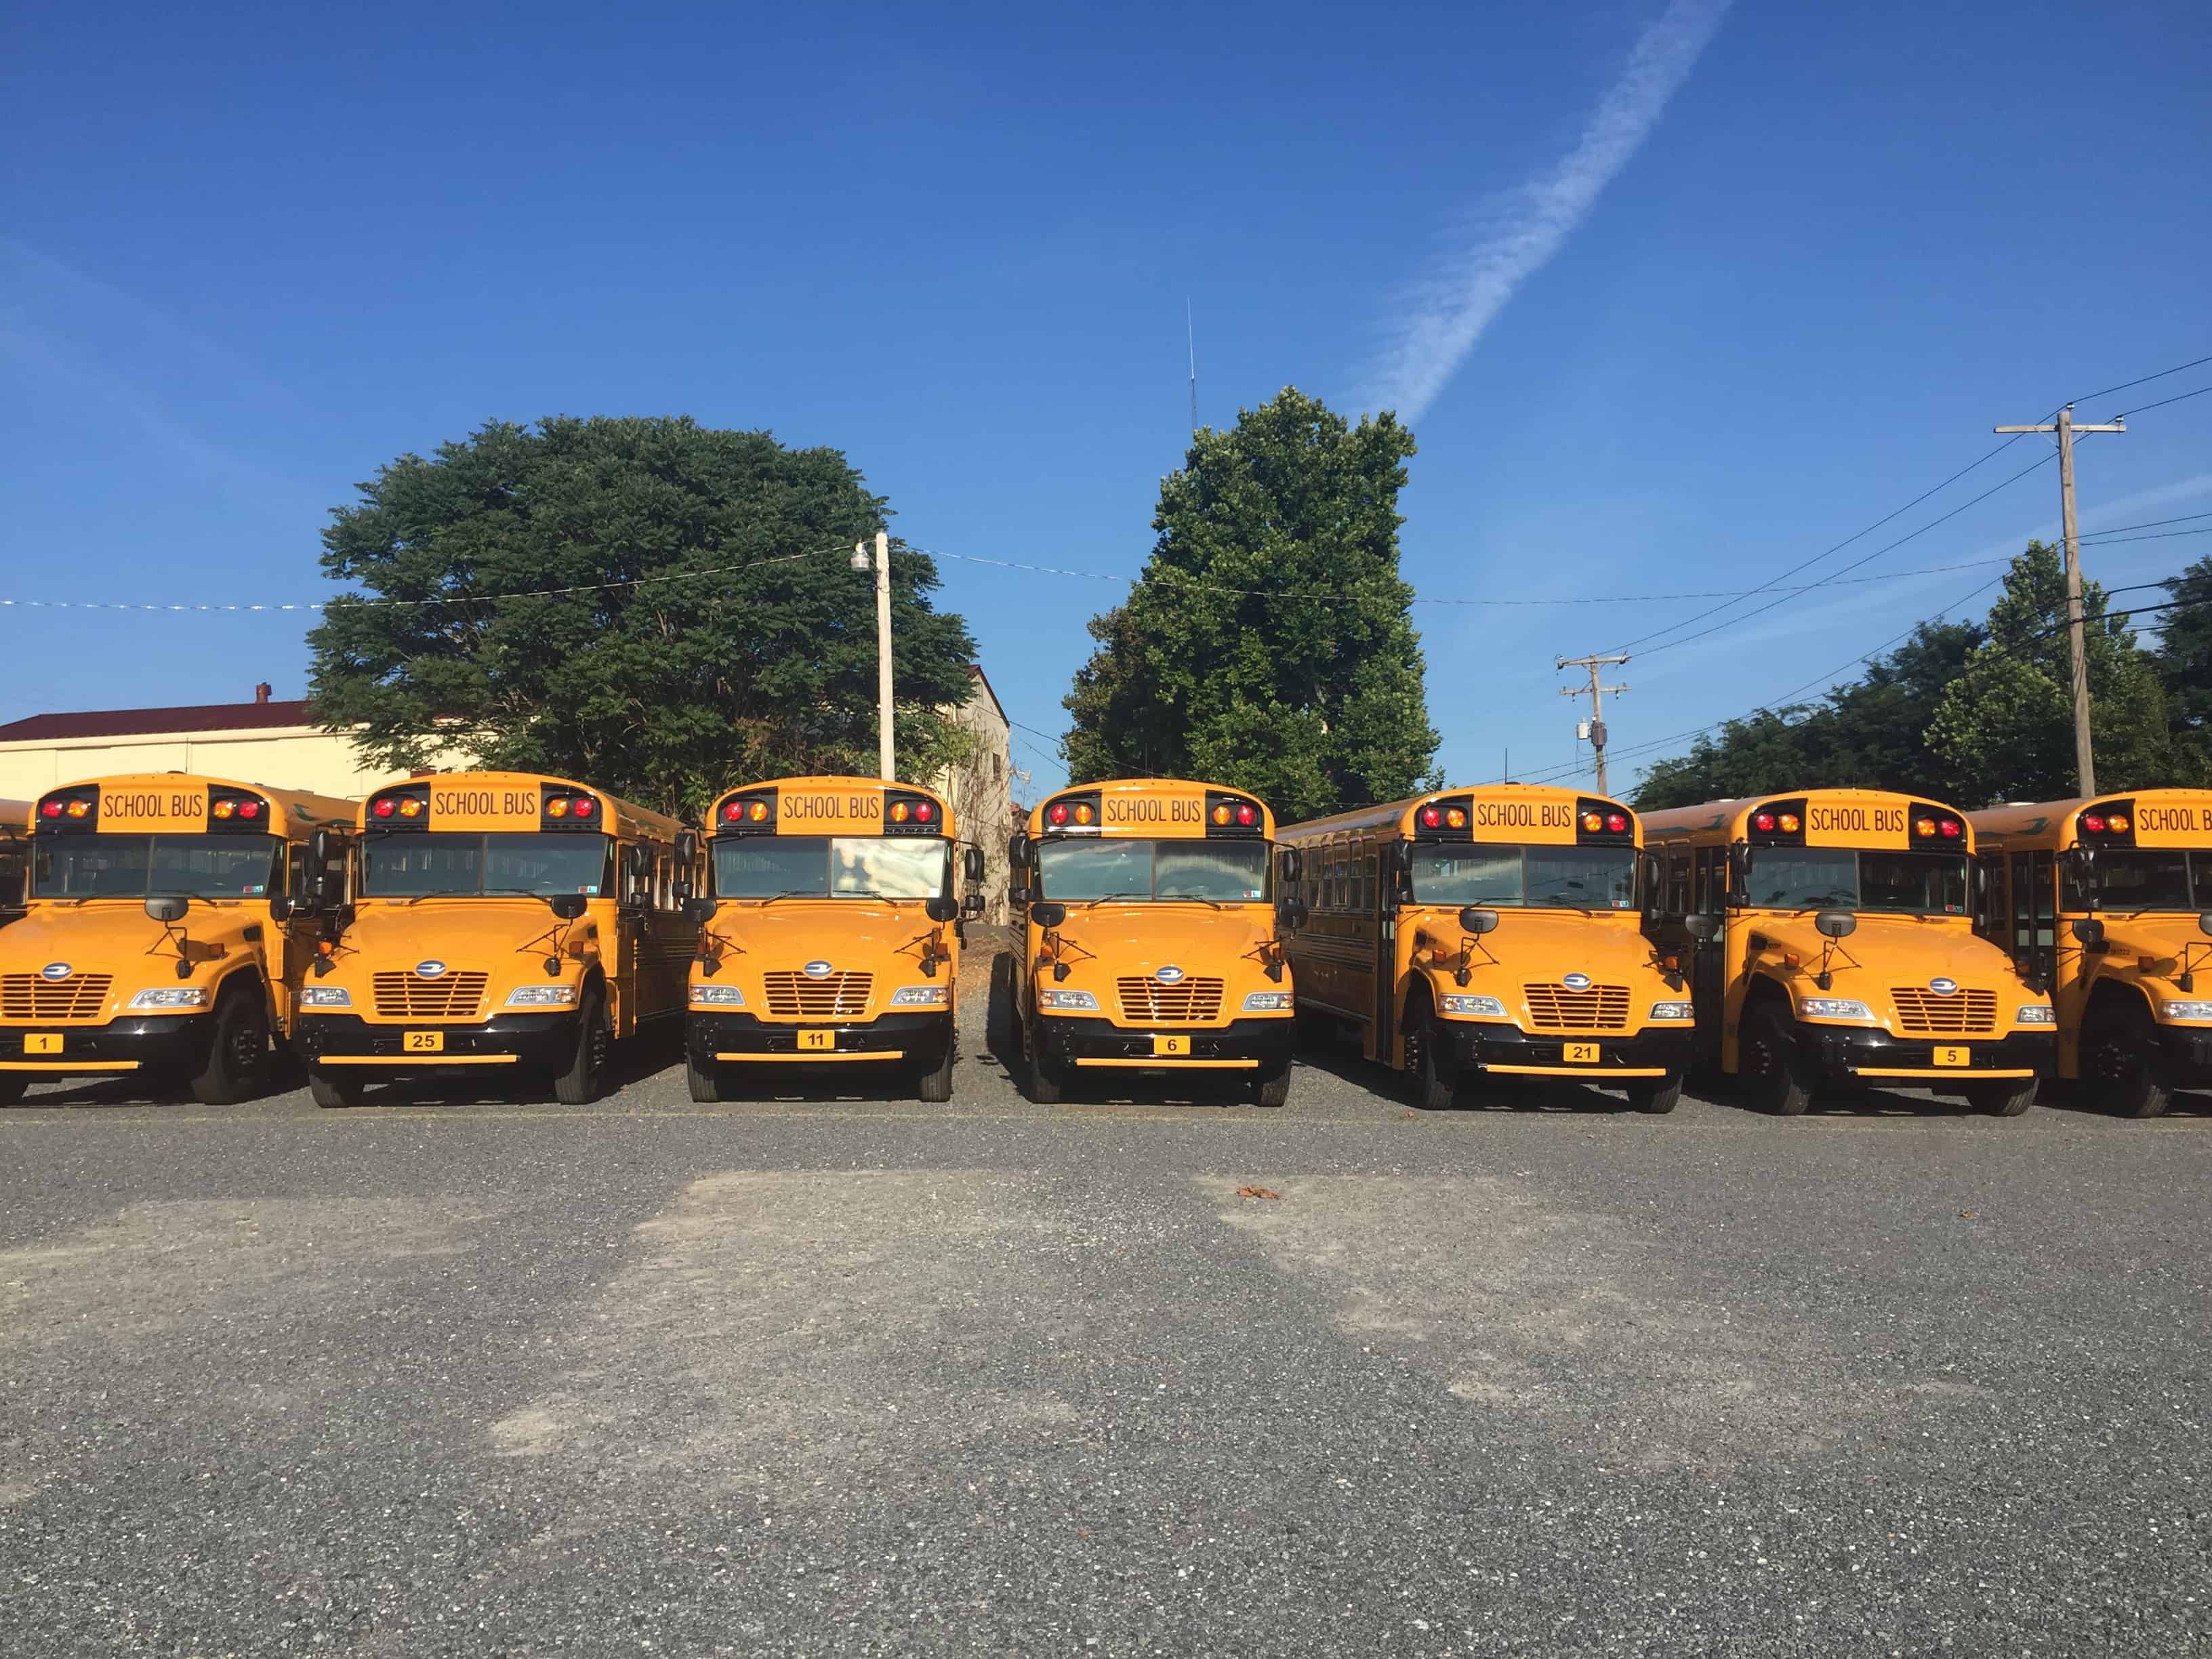 A line of buses in a school bus lot.